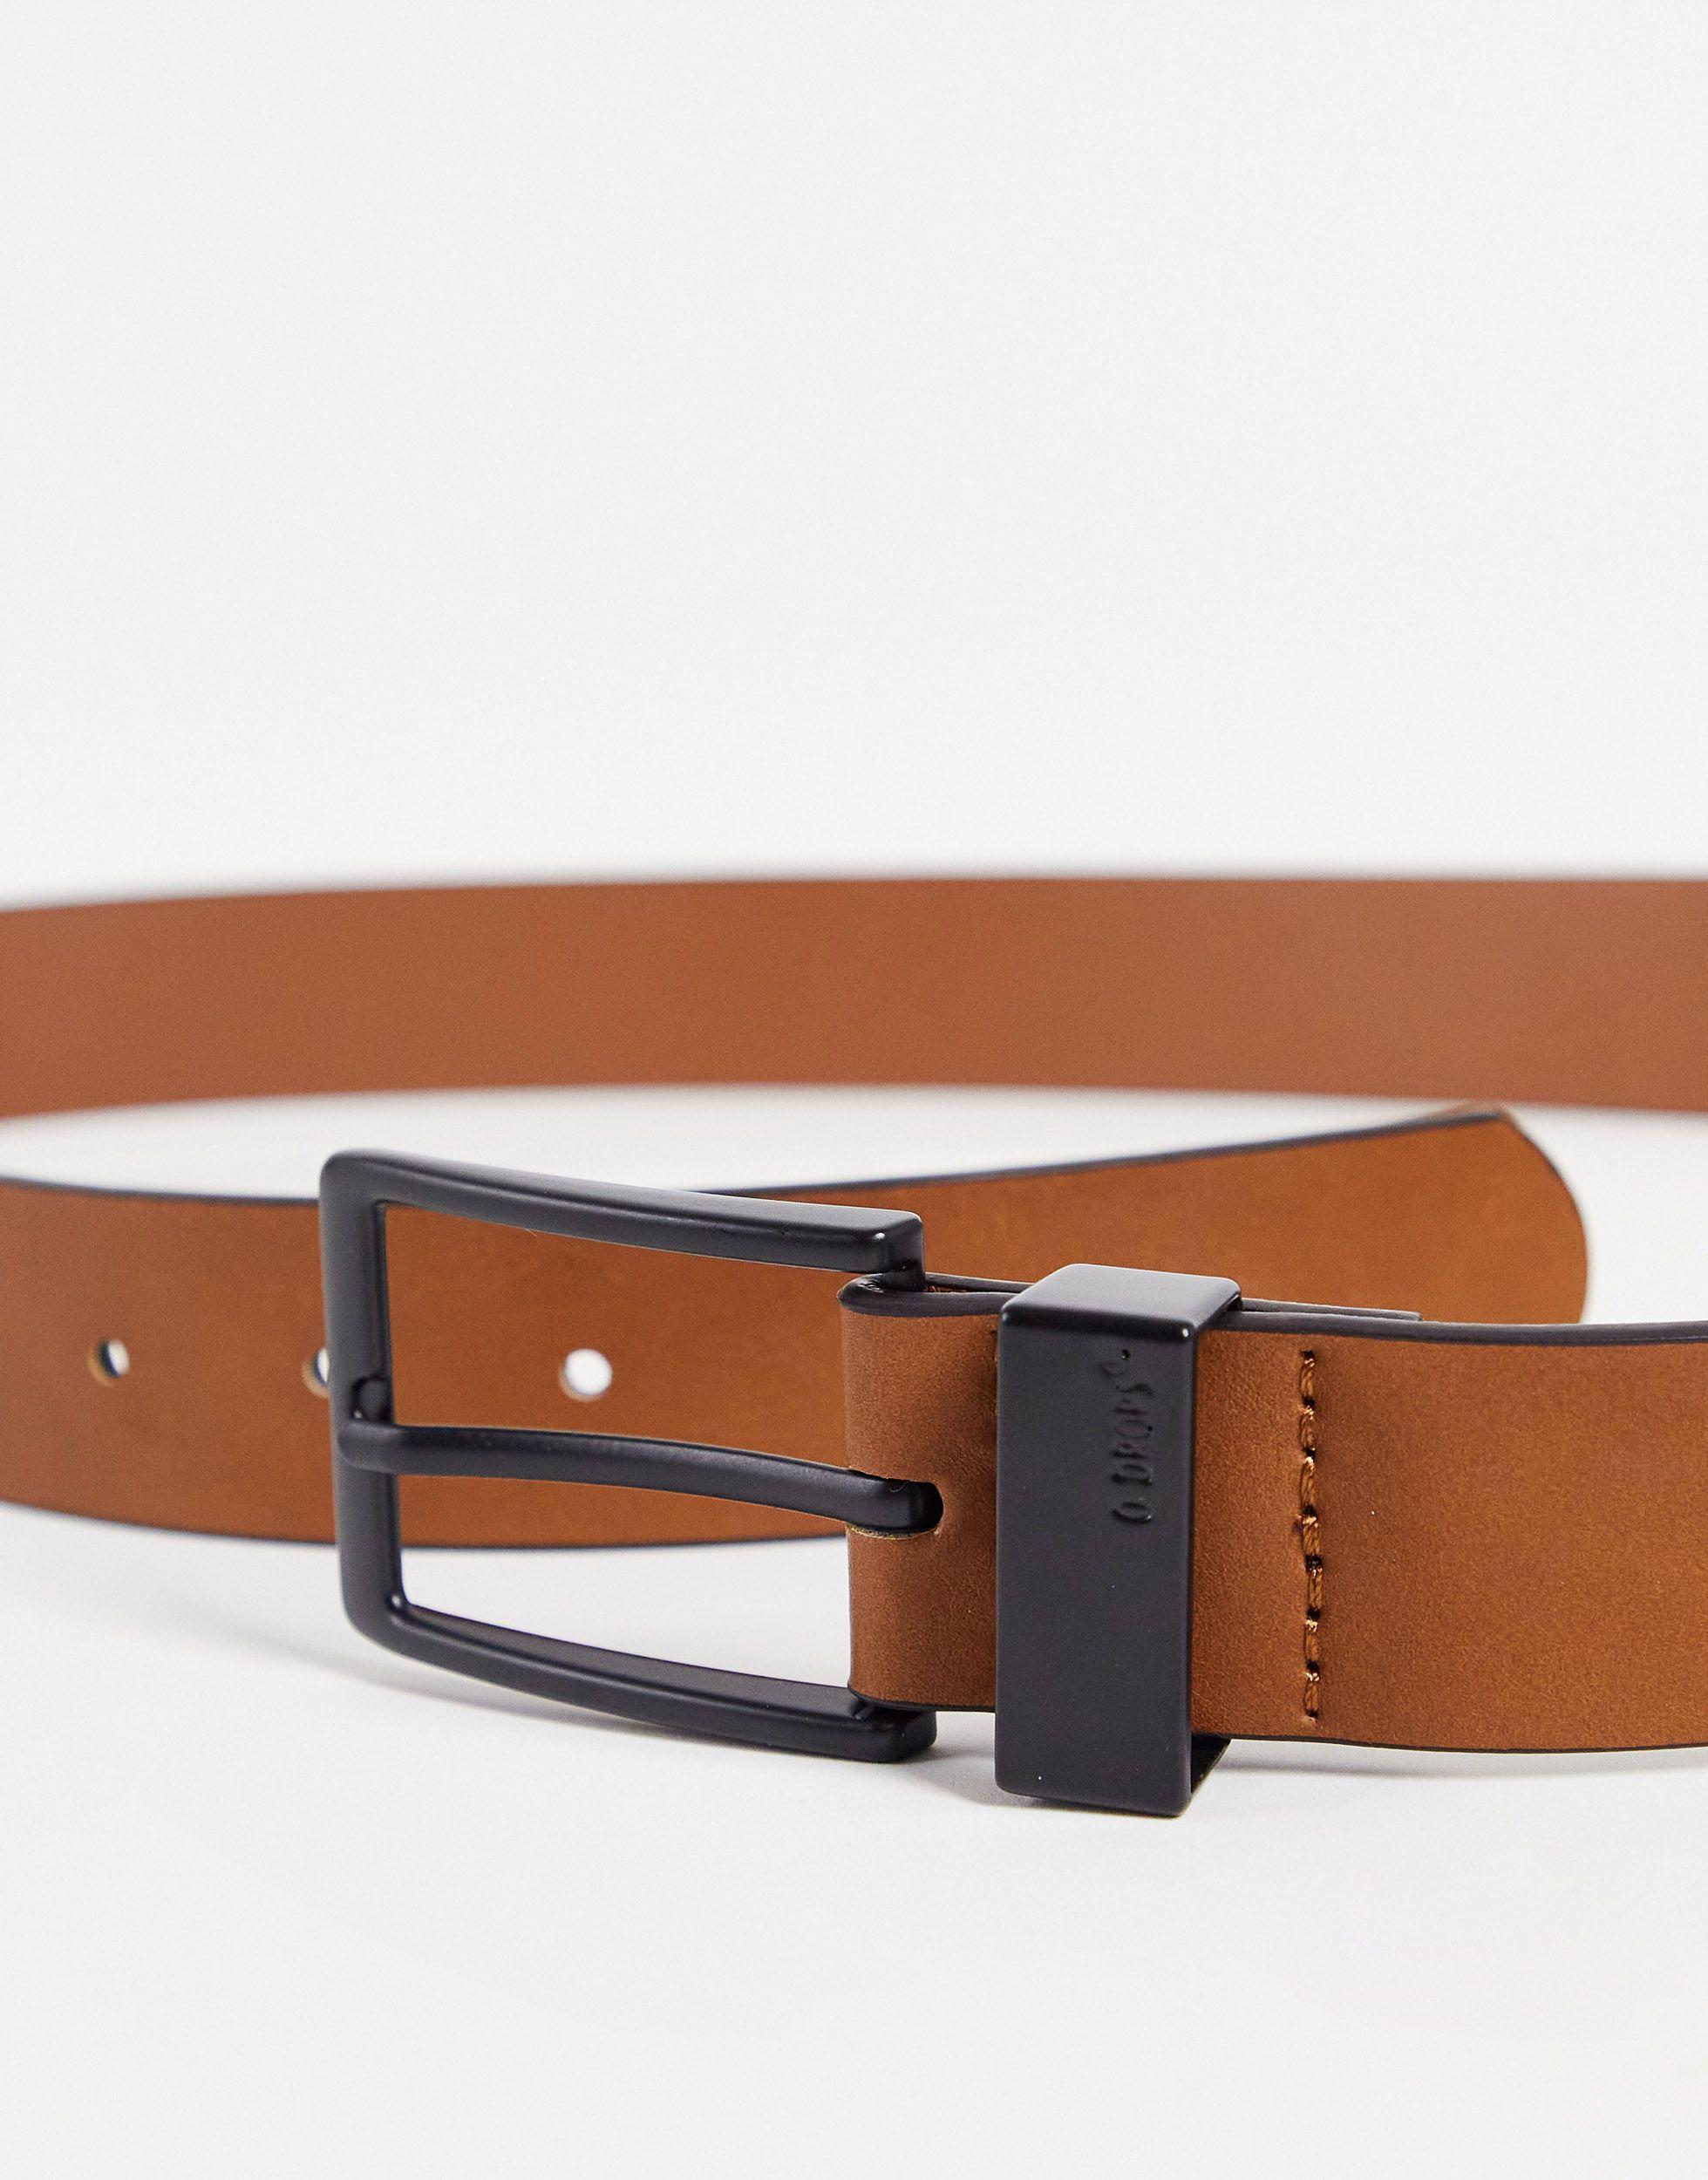 ASOS Design Smart Reversible Belt in Brown and Black Faux Leather with Silver Buckle